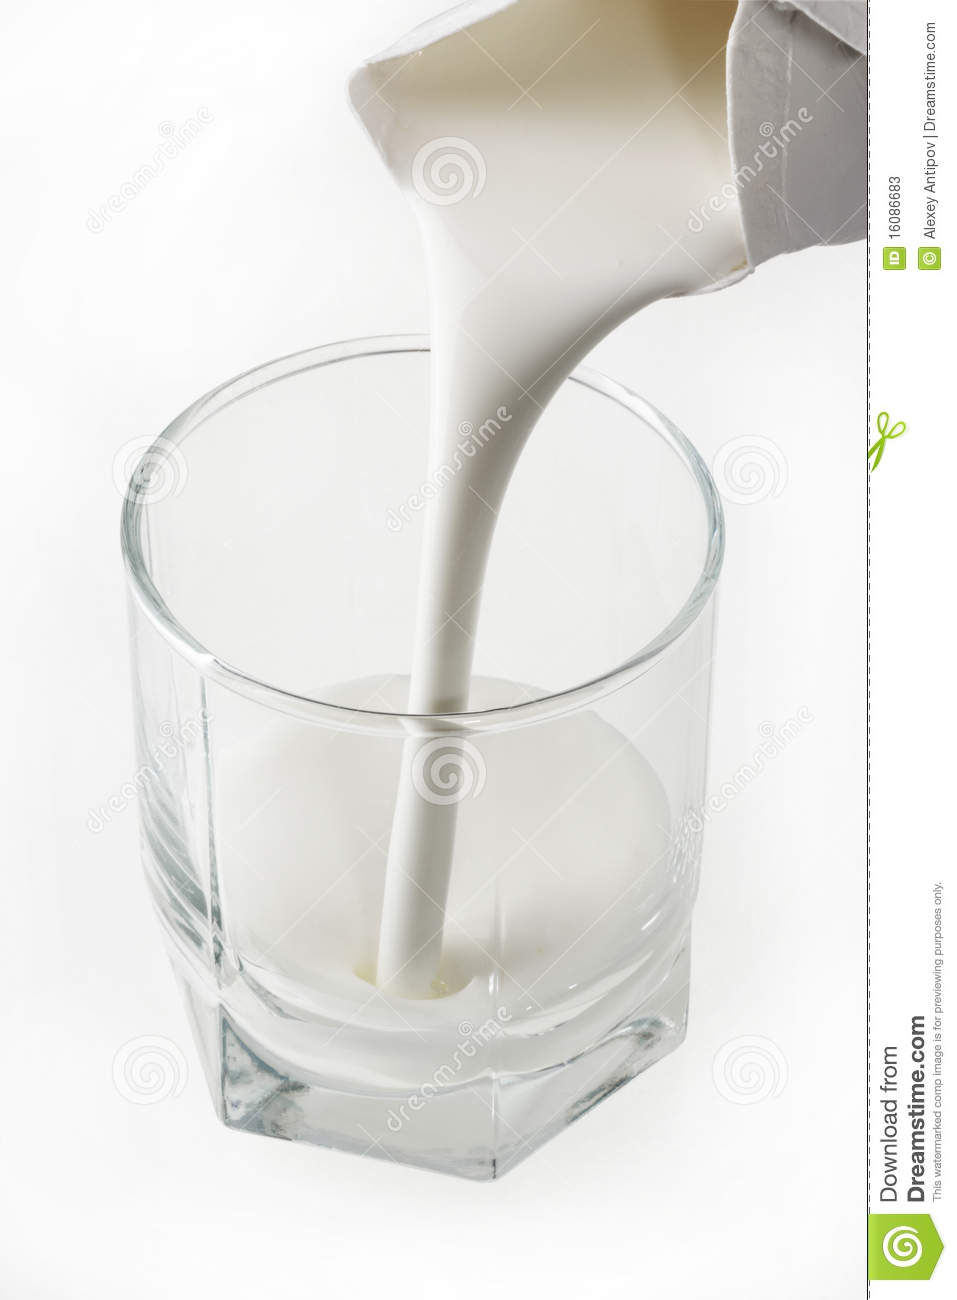 Similar Stock Images Of   Pouring A Fresh Glass Of Sour Milk Drink